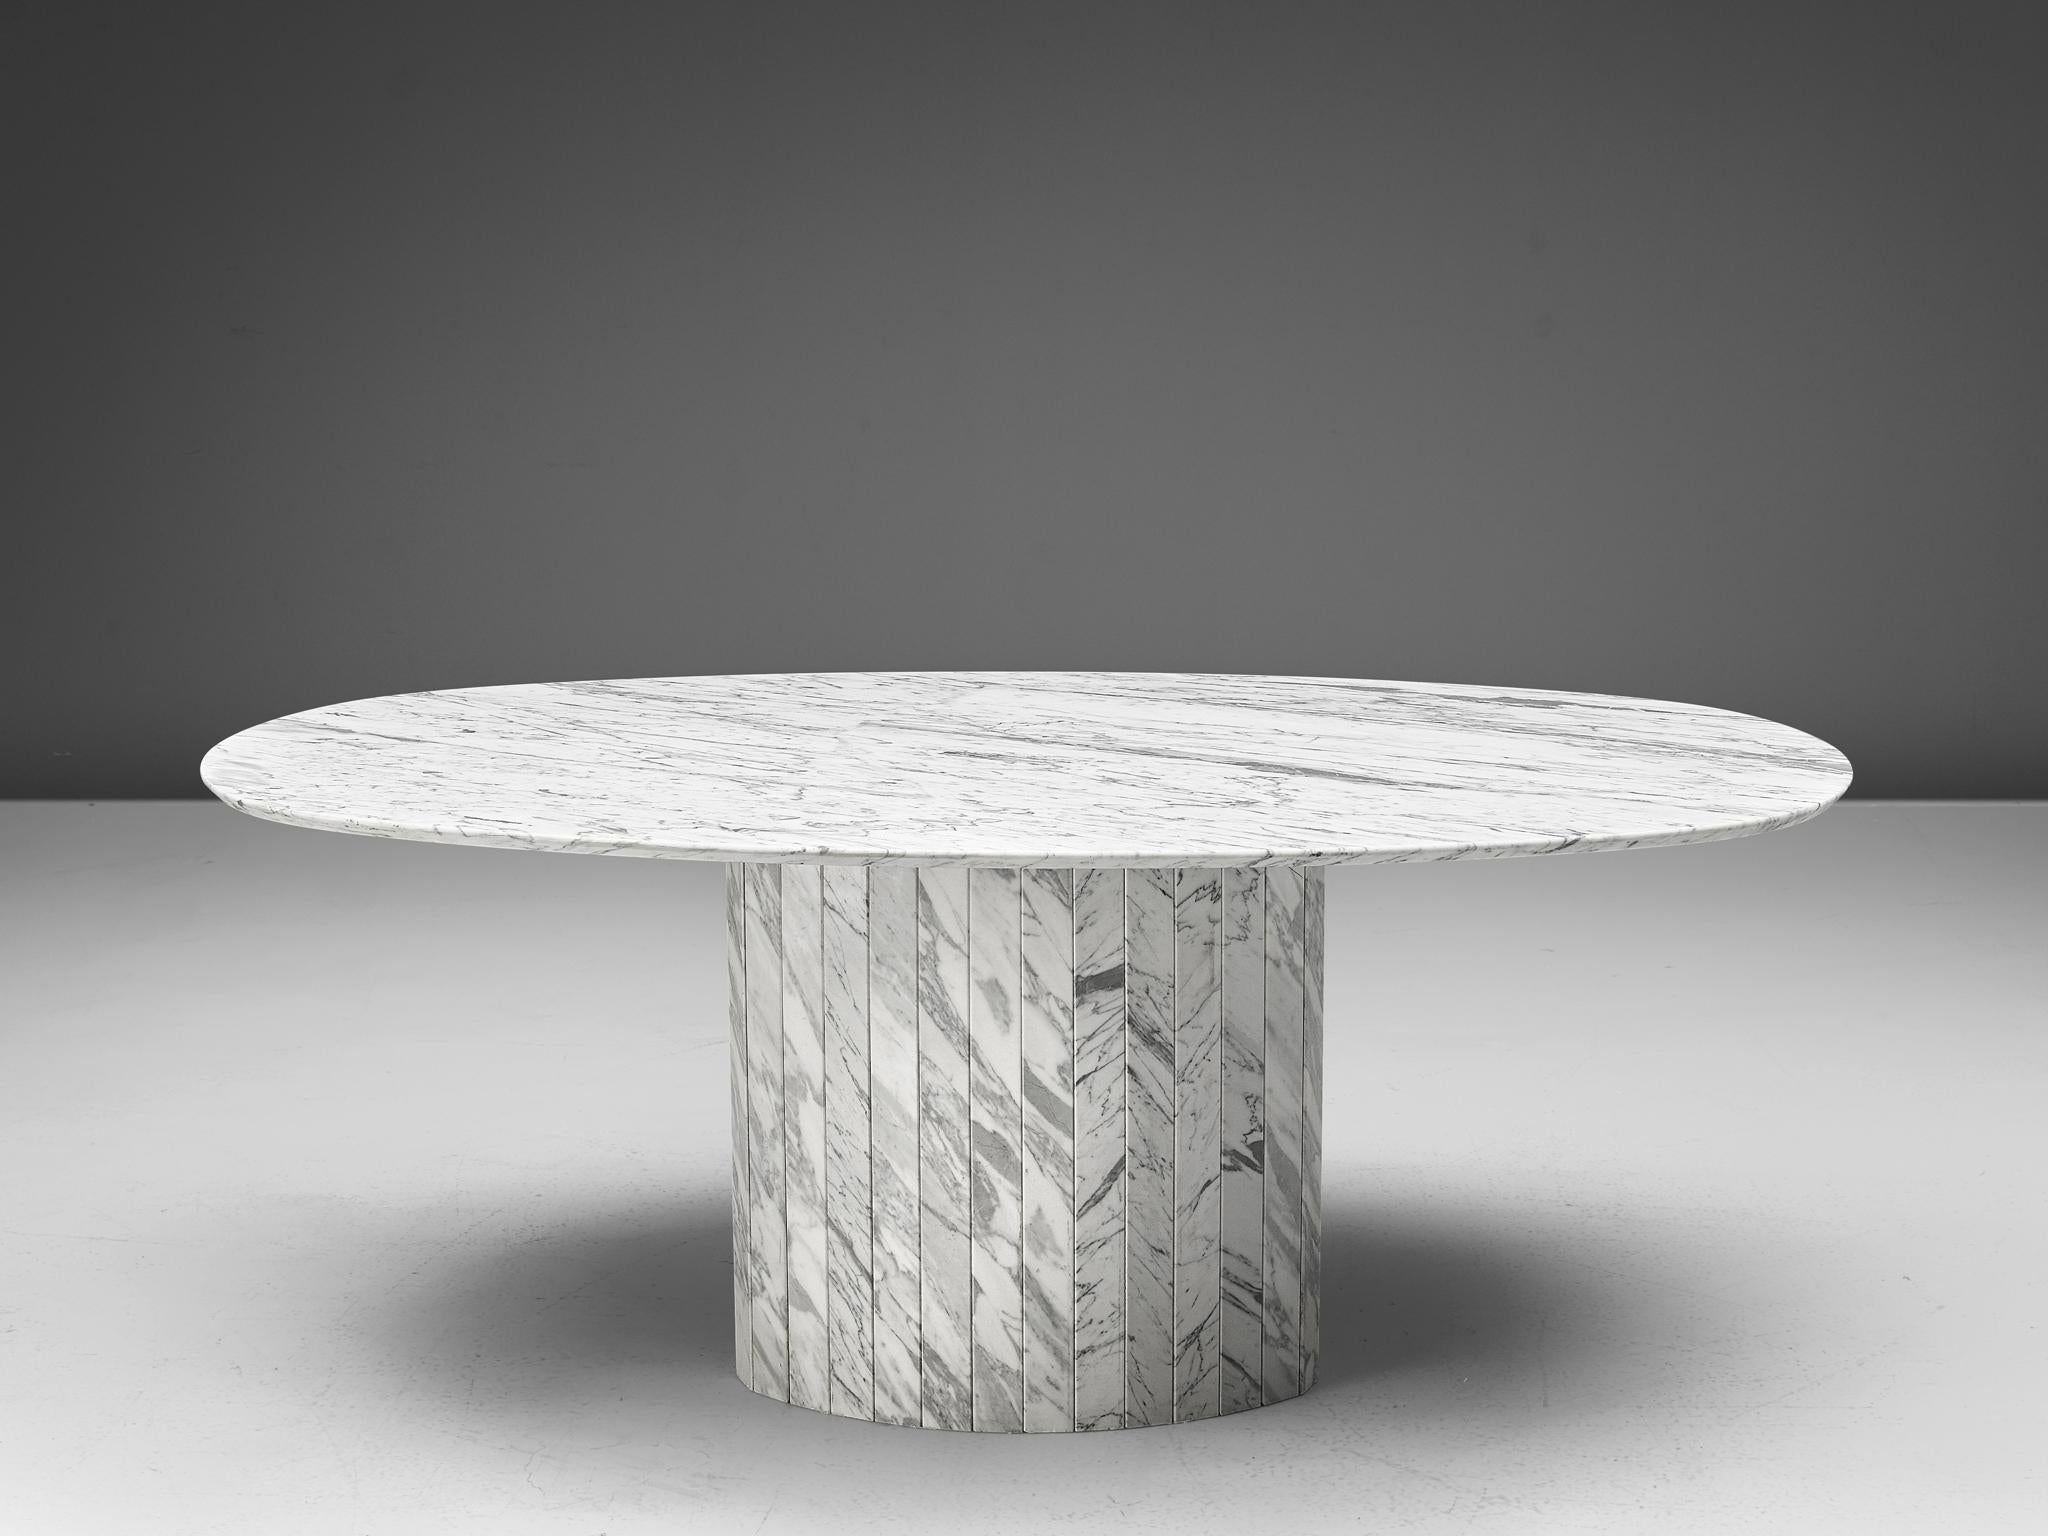 Oval dining table, Carrara marble, Germany, 1970s

This archetypical pedestal table is a skillful example of Postmodern design. The table is executed in white Carrara marble with grey lines. The oval table features no joints or clamps and is